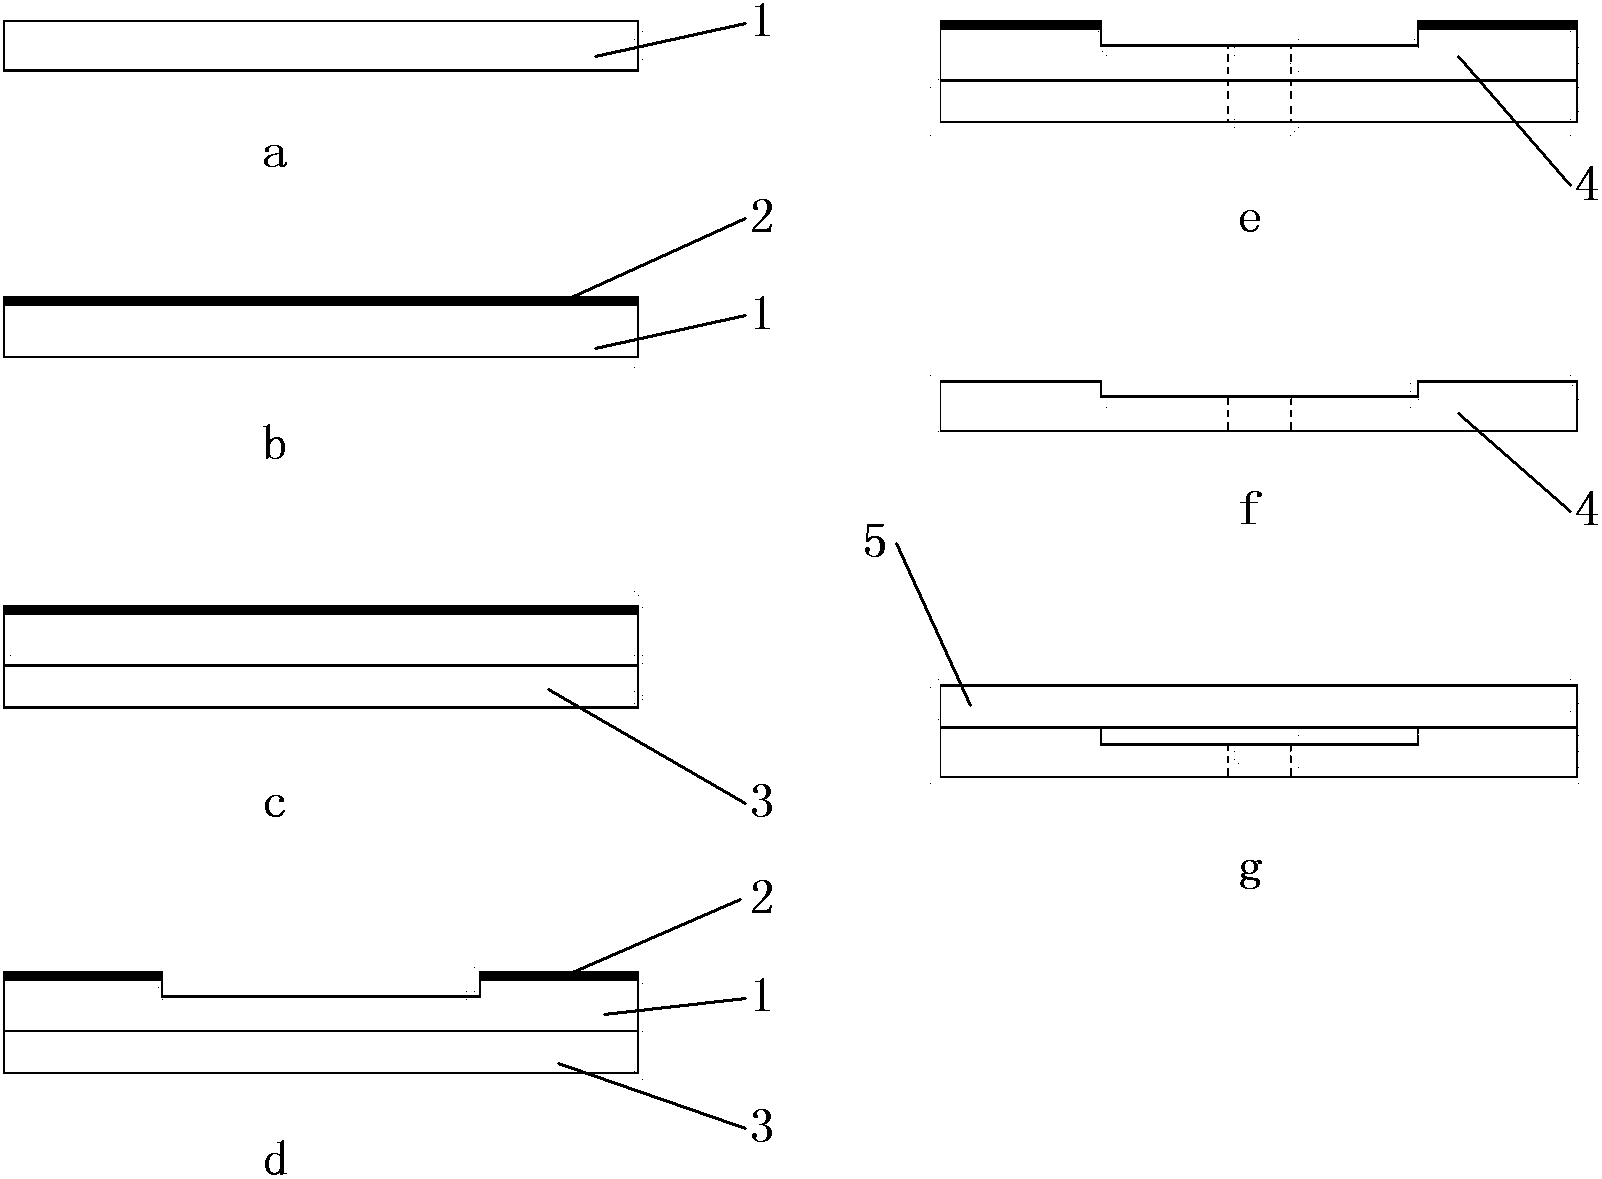 Supersonic wave processing method of glass base microfluidic chip